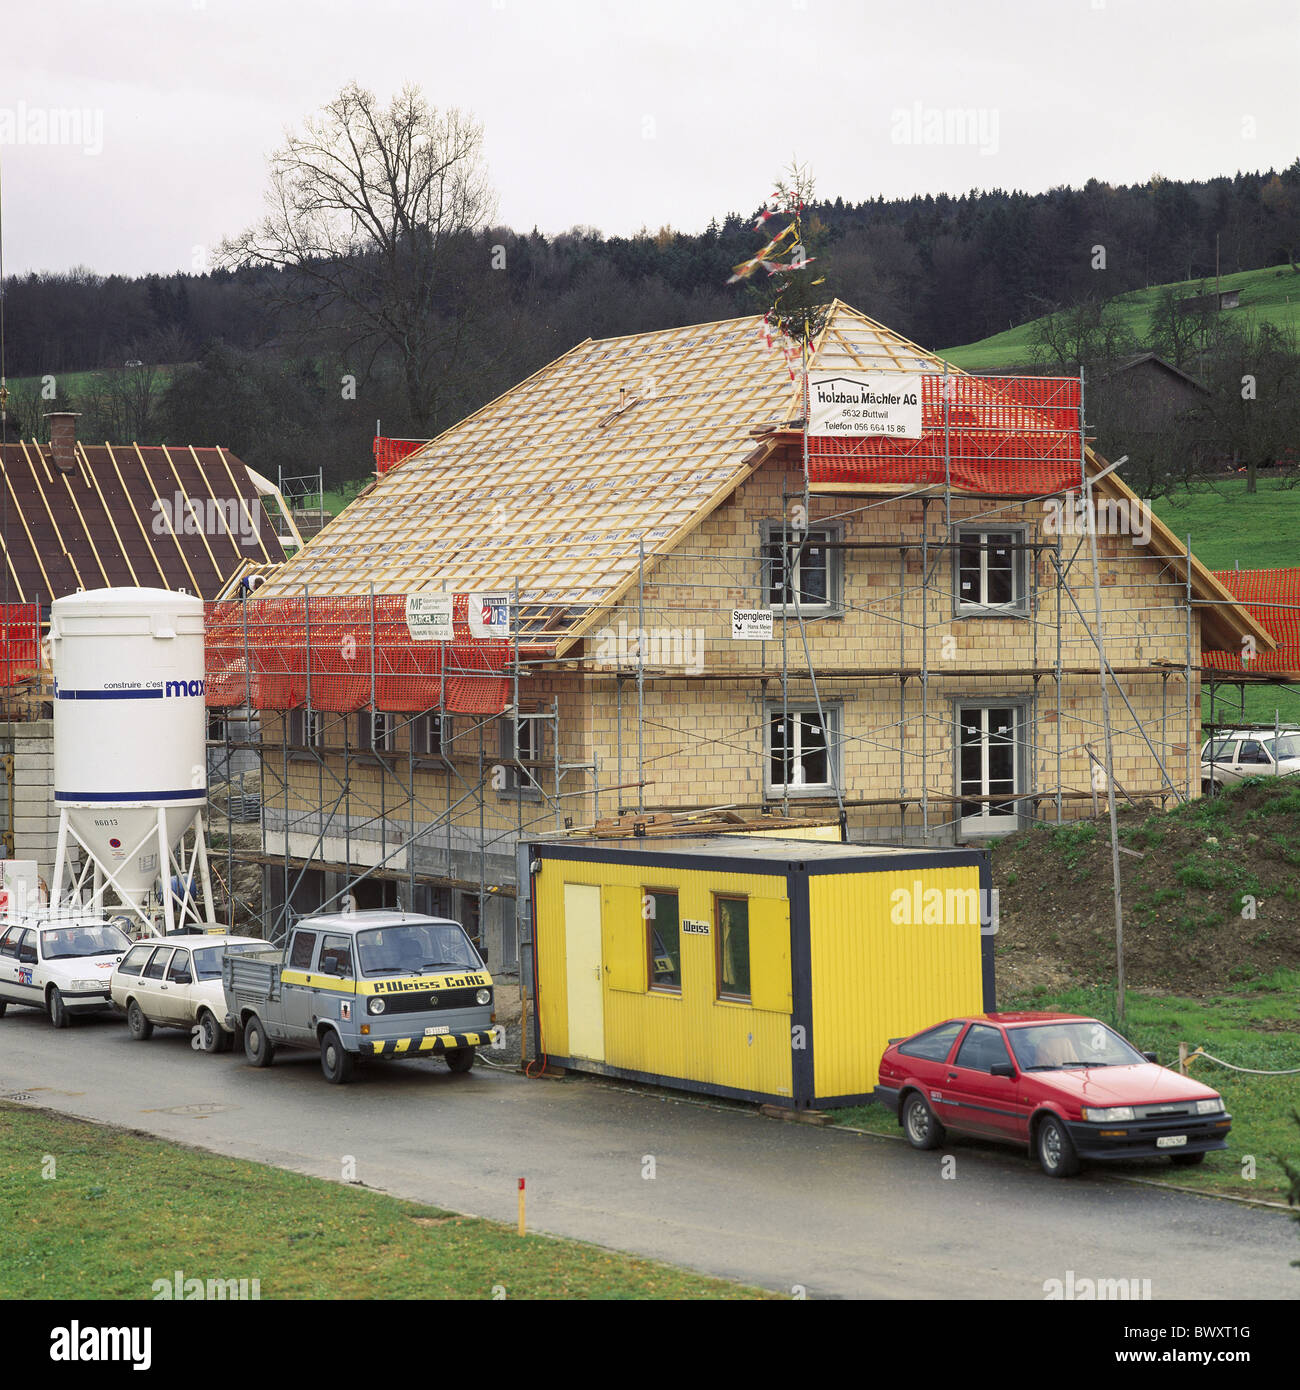 9 pictures Aargau April 1995th of June 1997 construction phases picture 6 series picture series series But Stock Photo